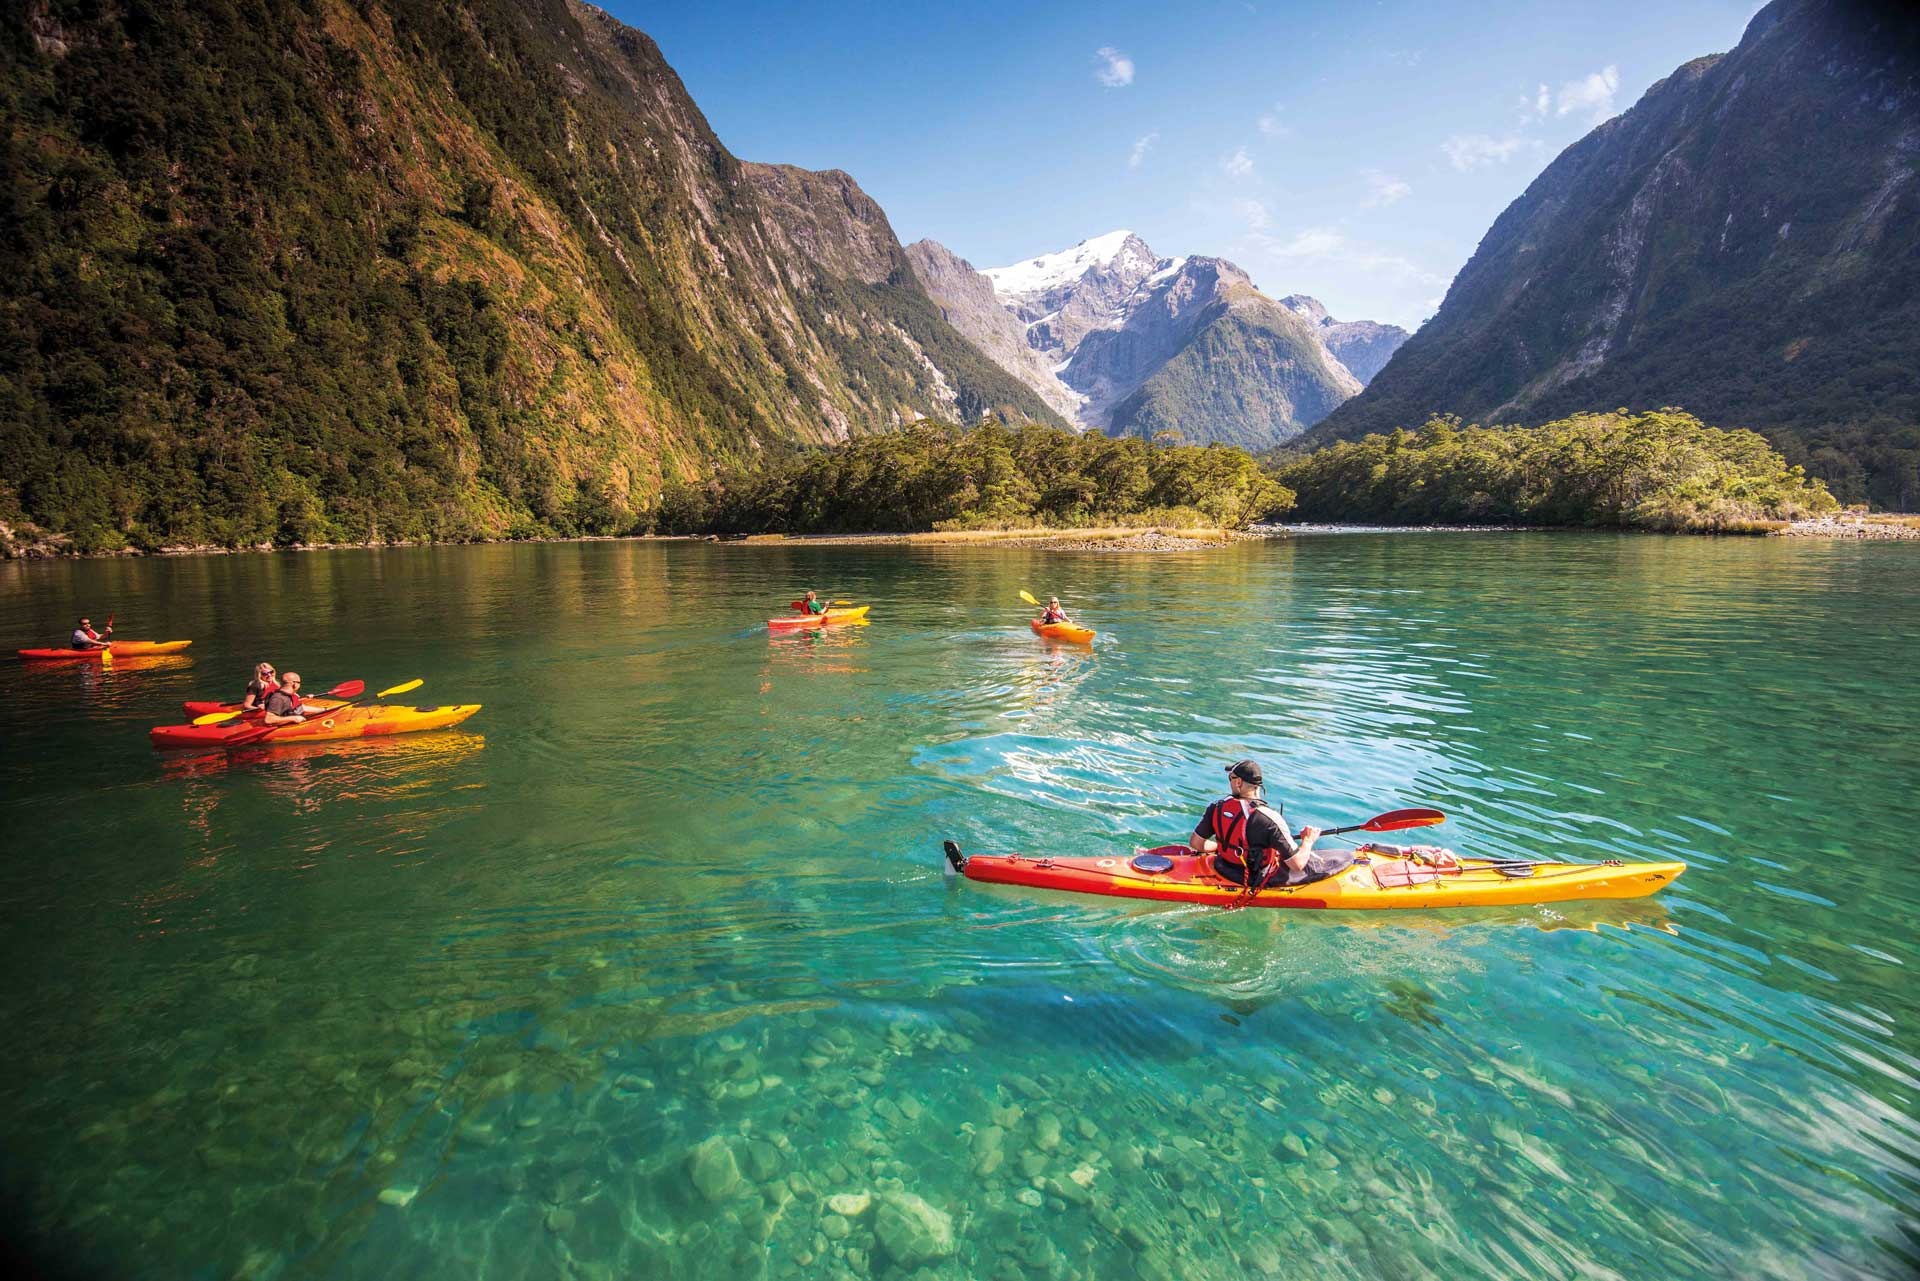 Kayaking: Recreational boating in Milford Sound fiord in the southwest of New Zealand's South Island. 1920x1290 HD Wallpaper.